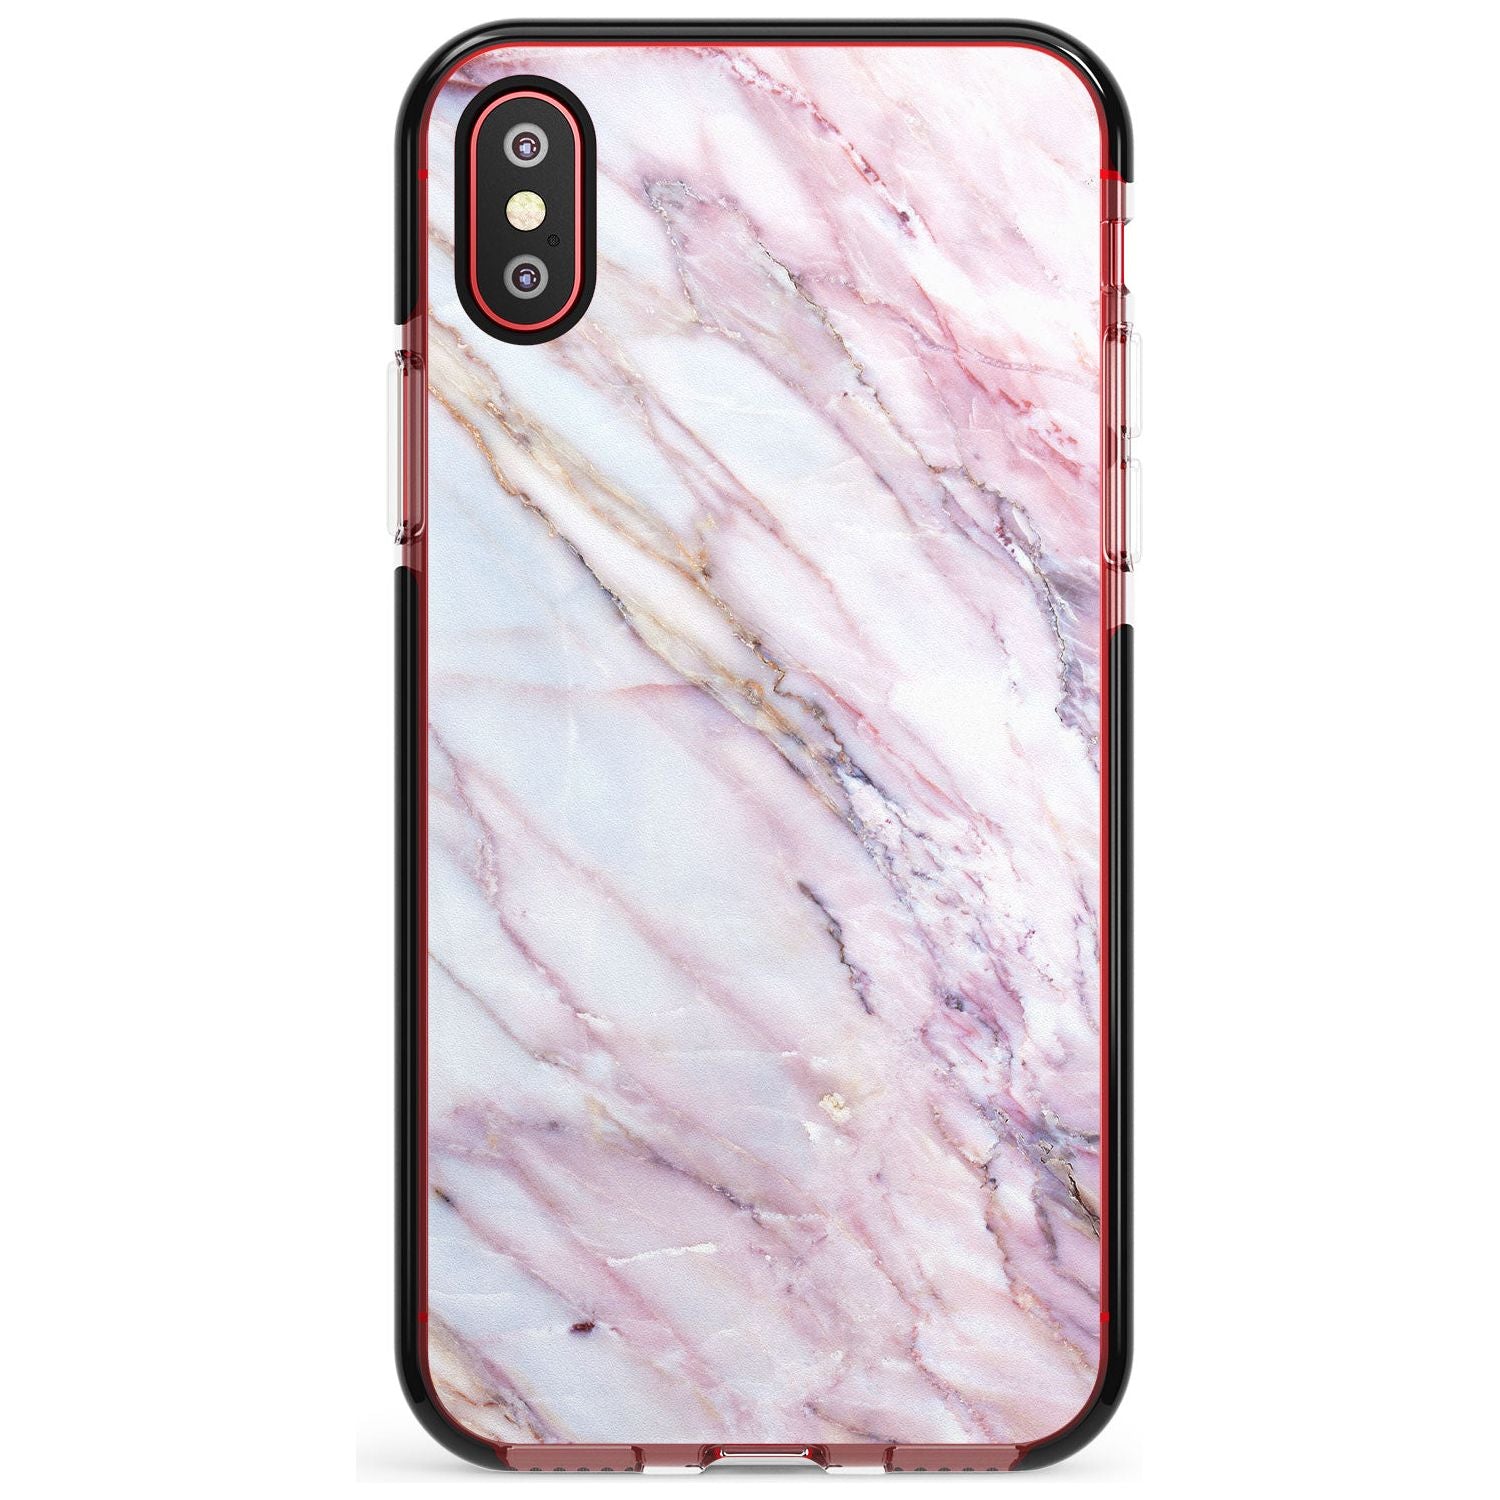 White, Pink & Purple Onyx Marble Texture Pink Fade Impact Phone Case for iPhone X XS Max XR